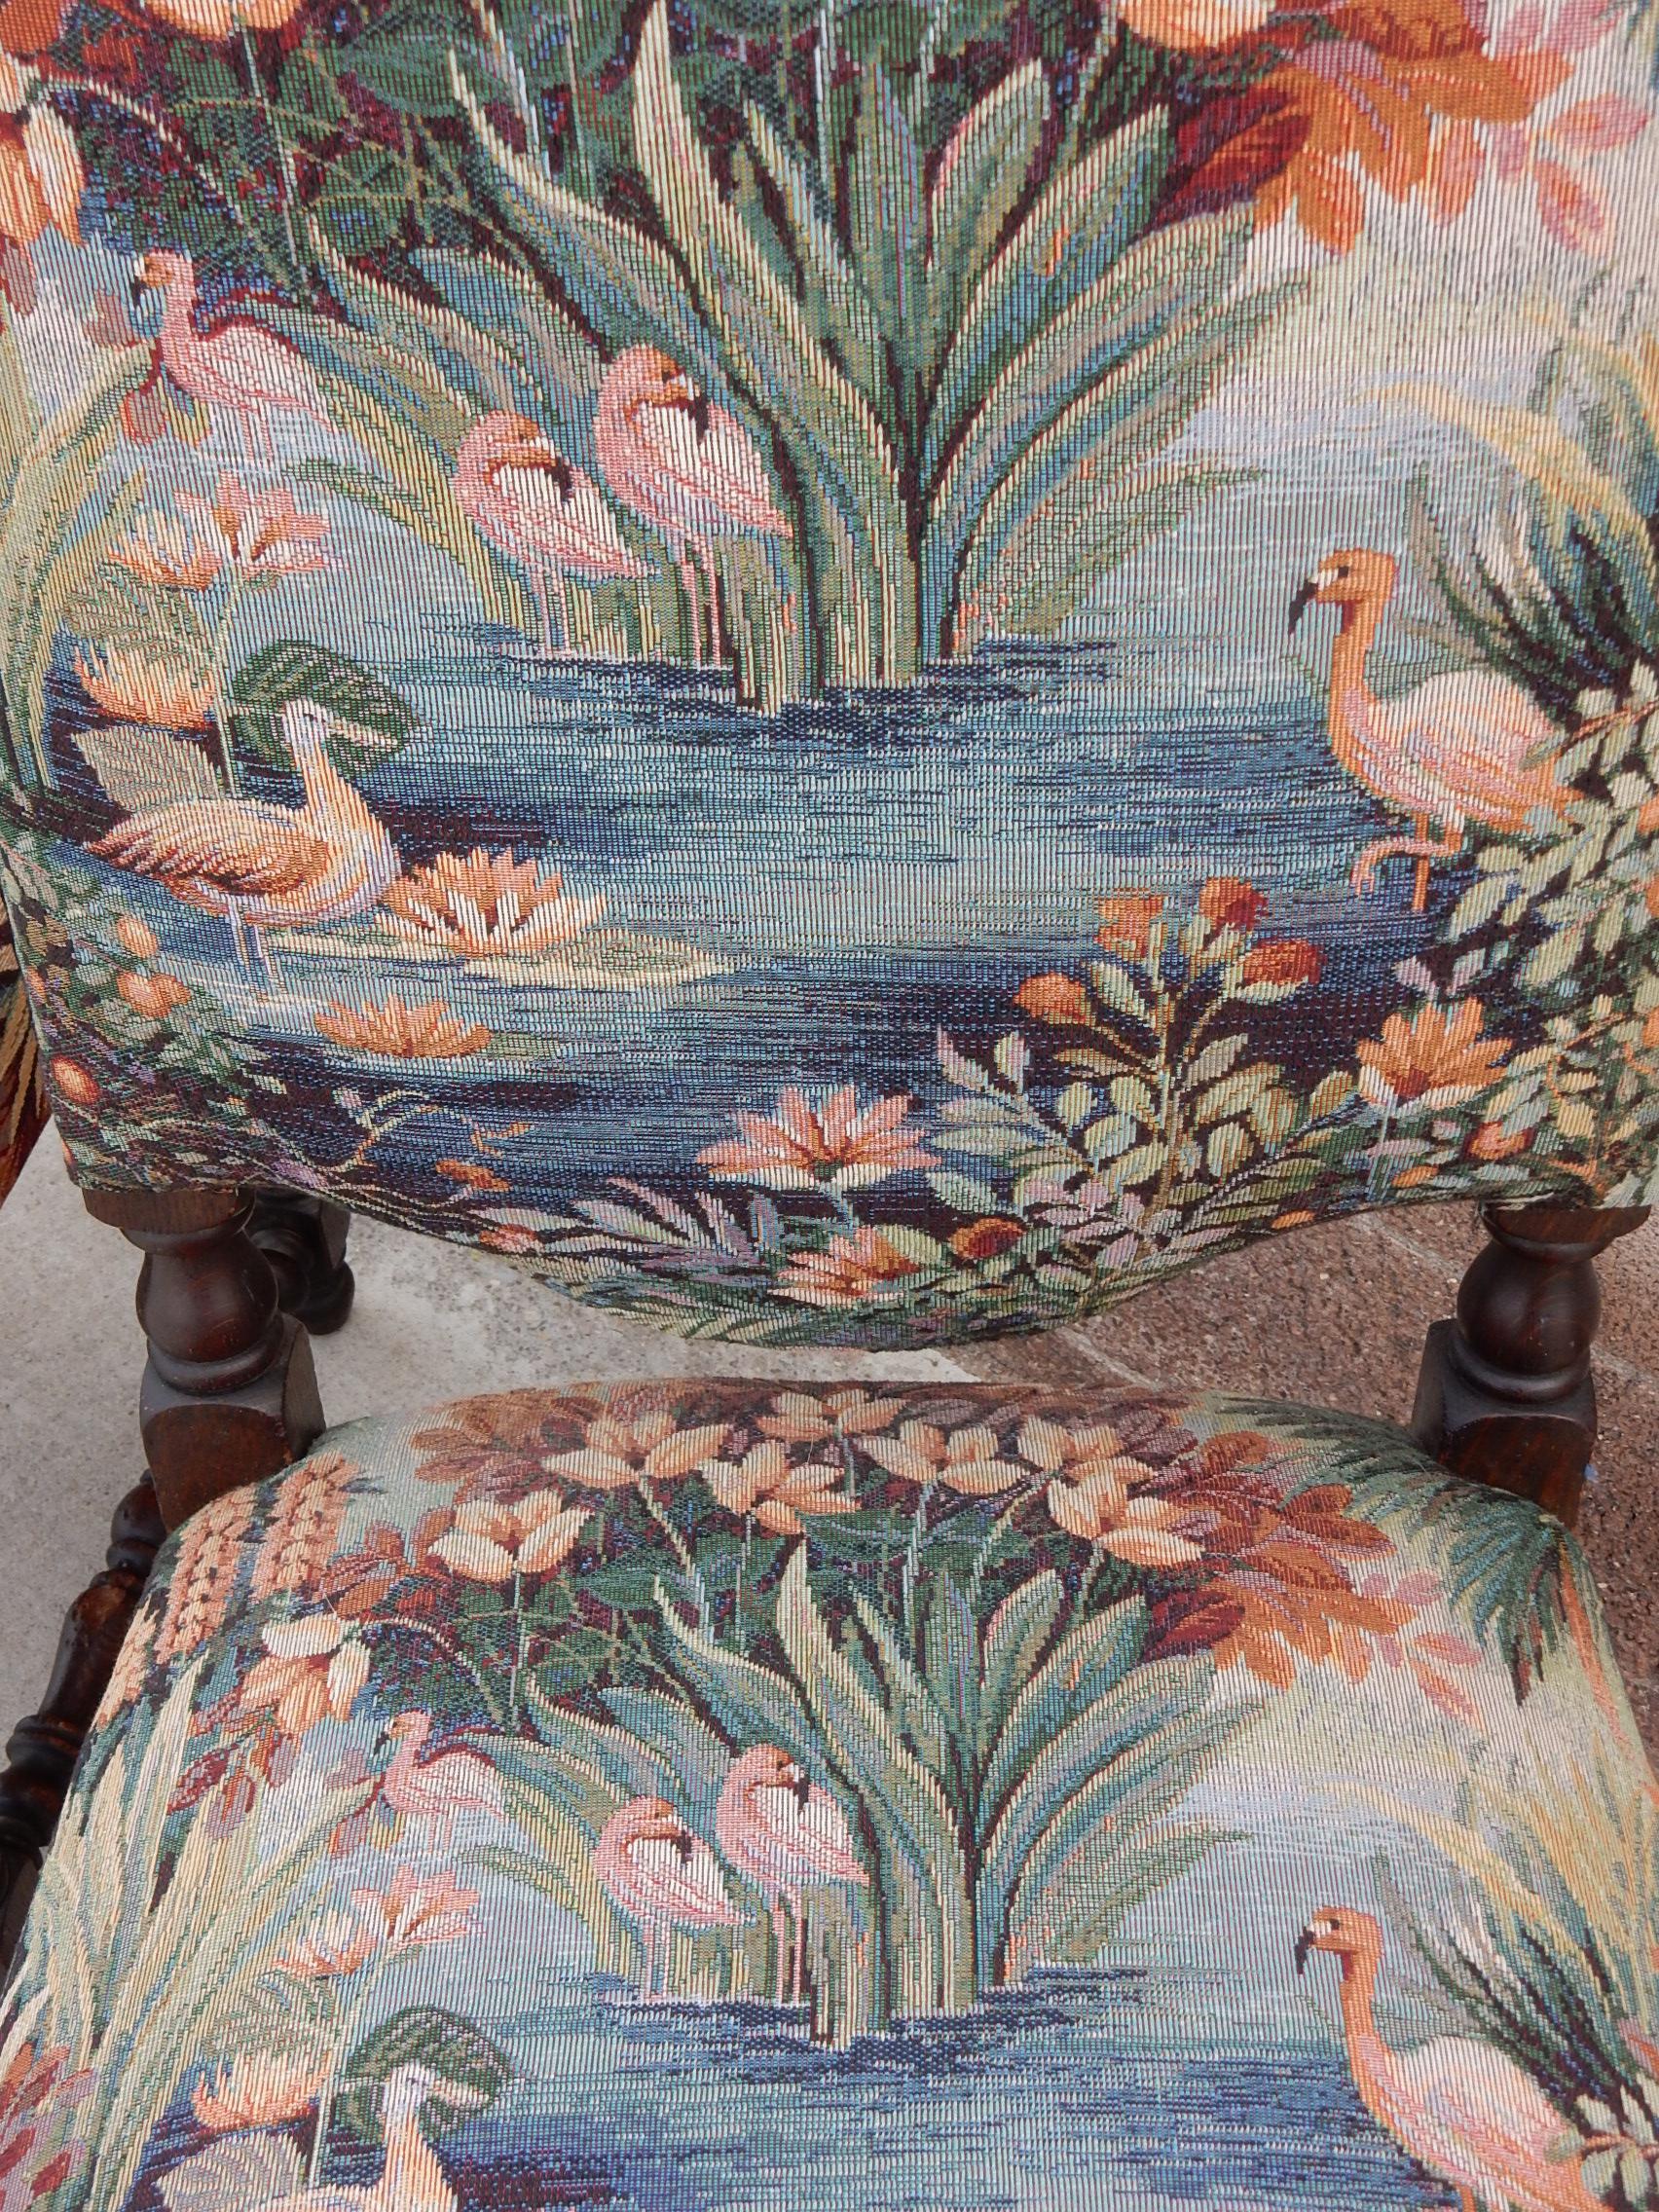 20th Century 1940's Spanish Colonial Revival Chairs Dressed in Flamingo Garden Upholstery